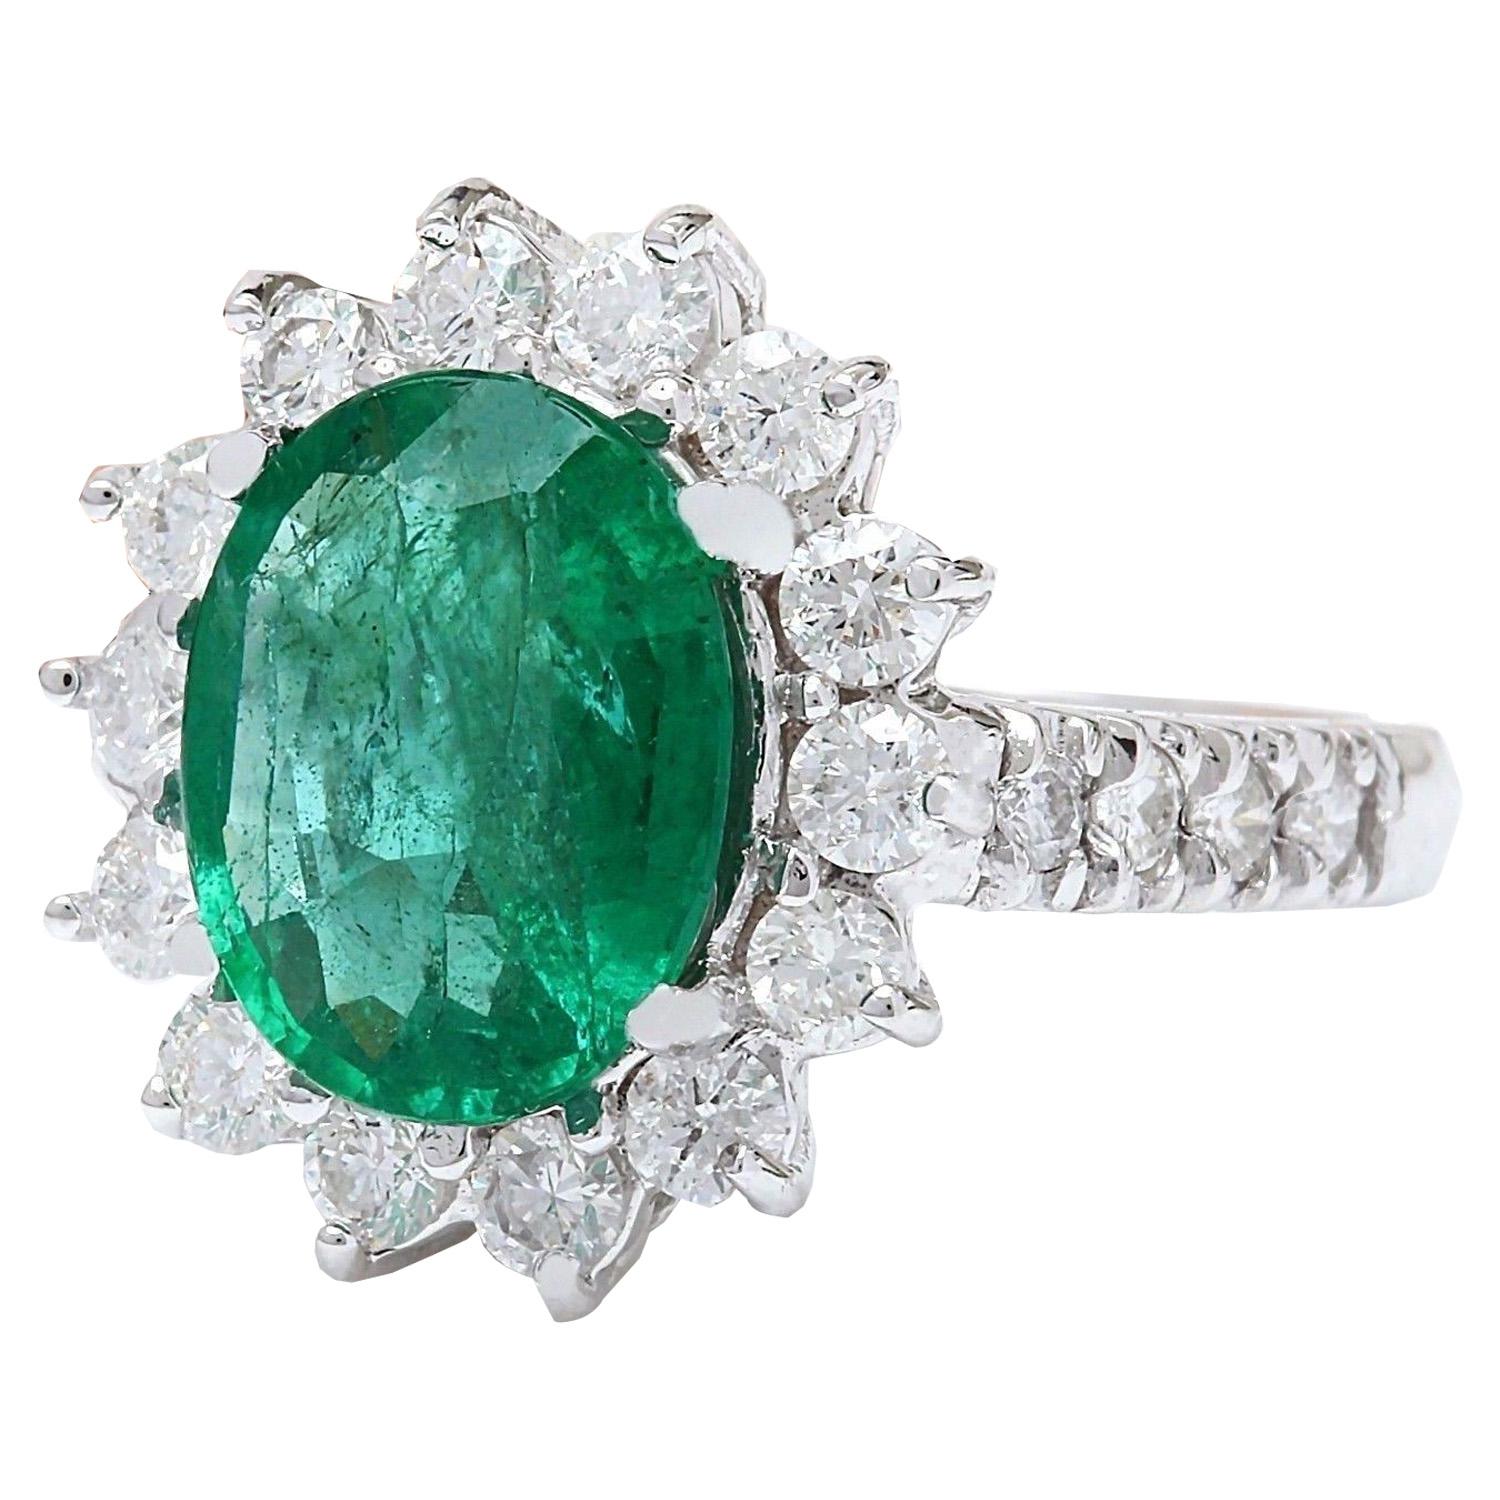 3.98 Carat Natural Emerald 14K Solid White Gold Diamond Ring
 Item Type: Ring
 Item Style: Engagement
 Material: 14K White Gold
 Mainstone: Emerald
 Stone Color: Green
 Stone Weight: 2.78 Carat
 Stone Shape: Oval
 Stone Quantity: 1
 Stone